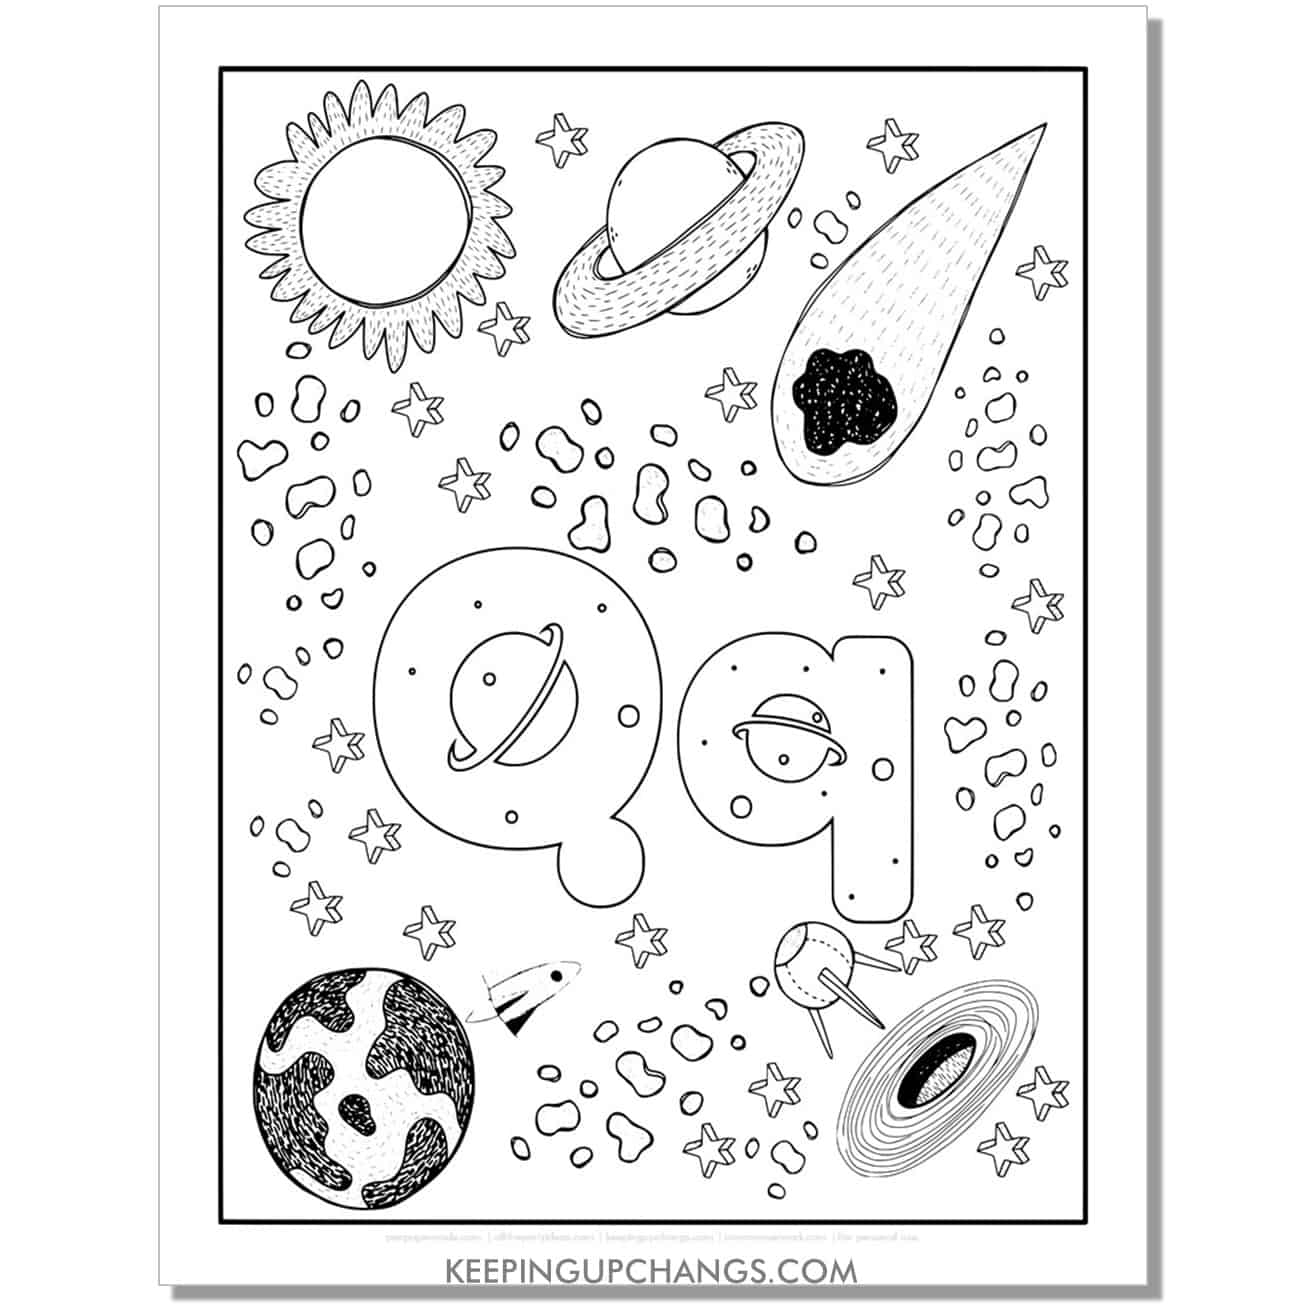 free alphabet letter q coloring page for kids with rockets, space theme.